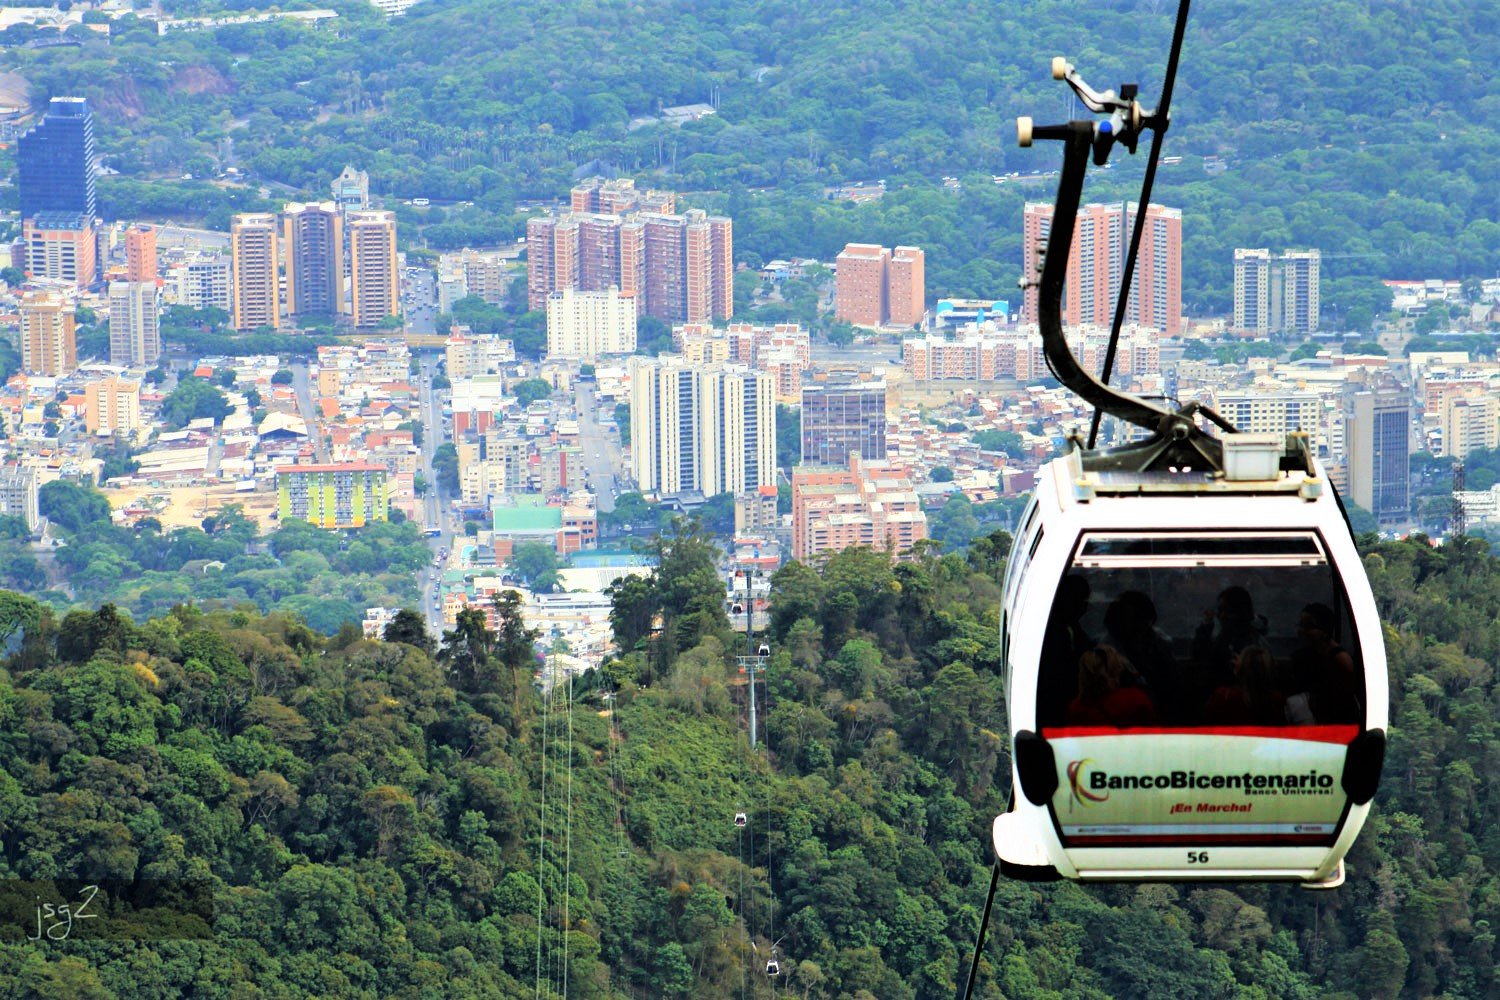 How to take a ride over the cite in a cable way cabin in Caracas